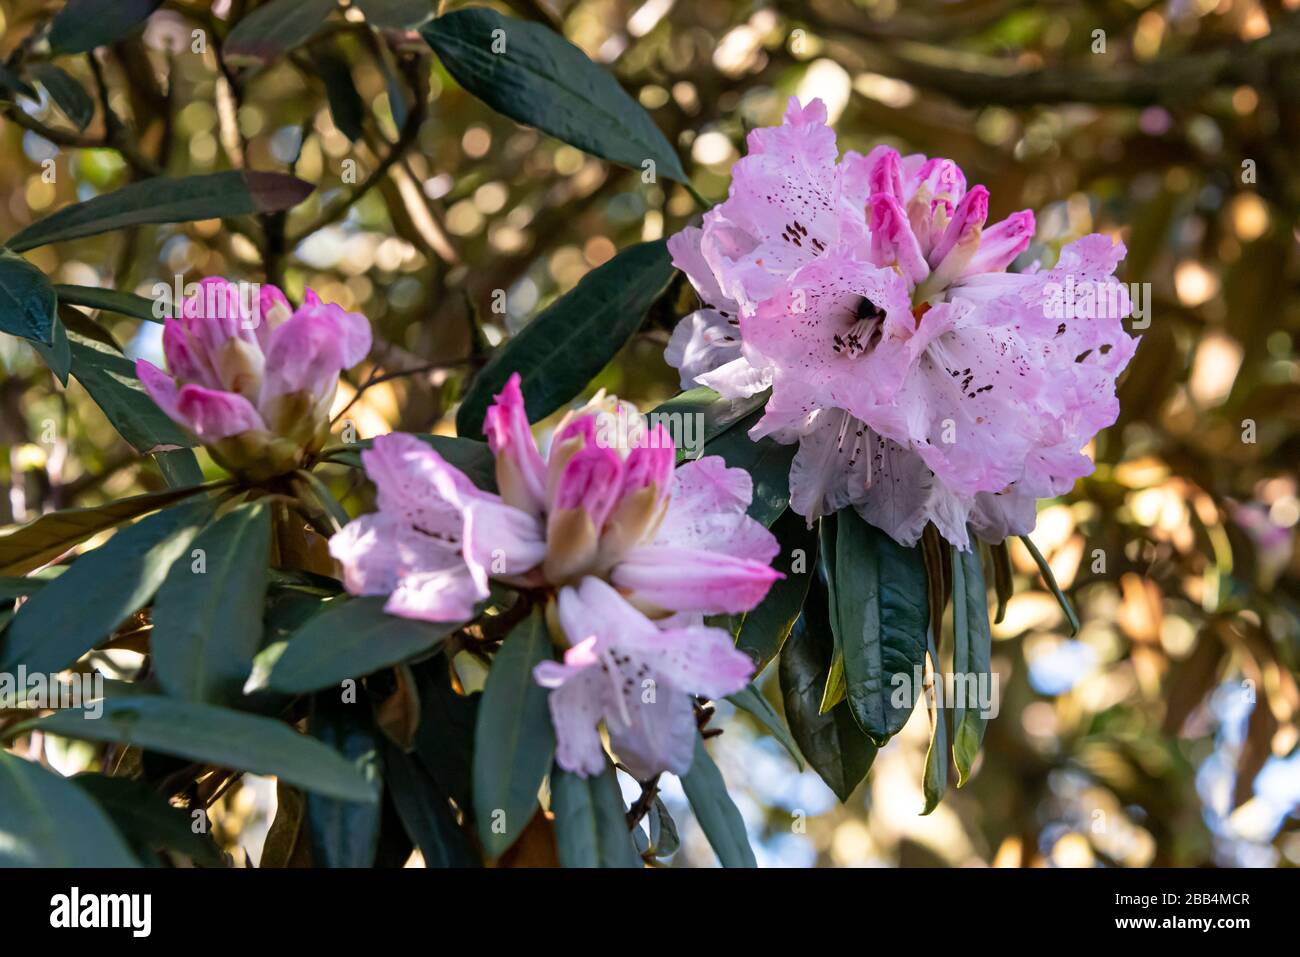 Rhododendron arboretum Ericaceae, tree-like rhododendron with pink flowers. Stock Photo